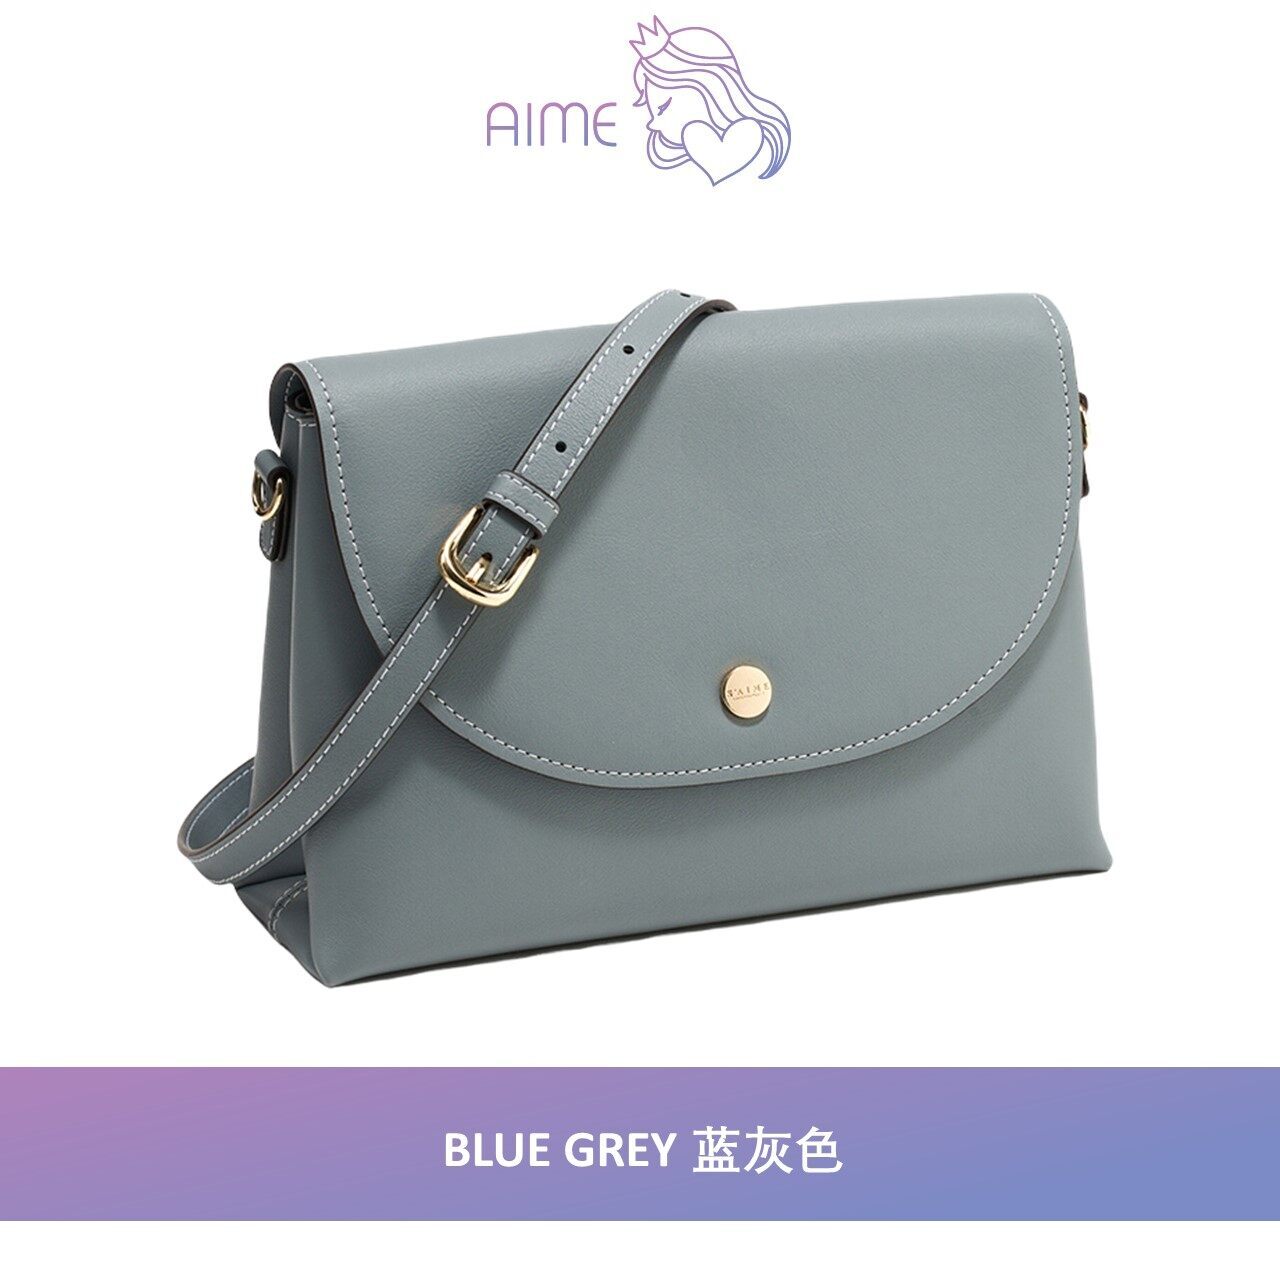 S'AIME | Authentic Leather Lightweight Square Bag With Compartments 真皮轻巧隔层方包